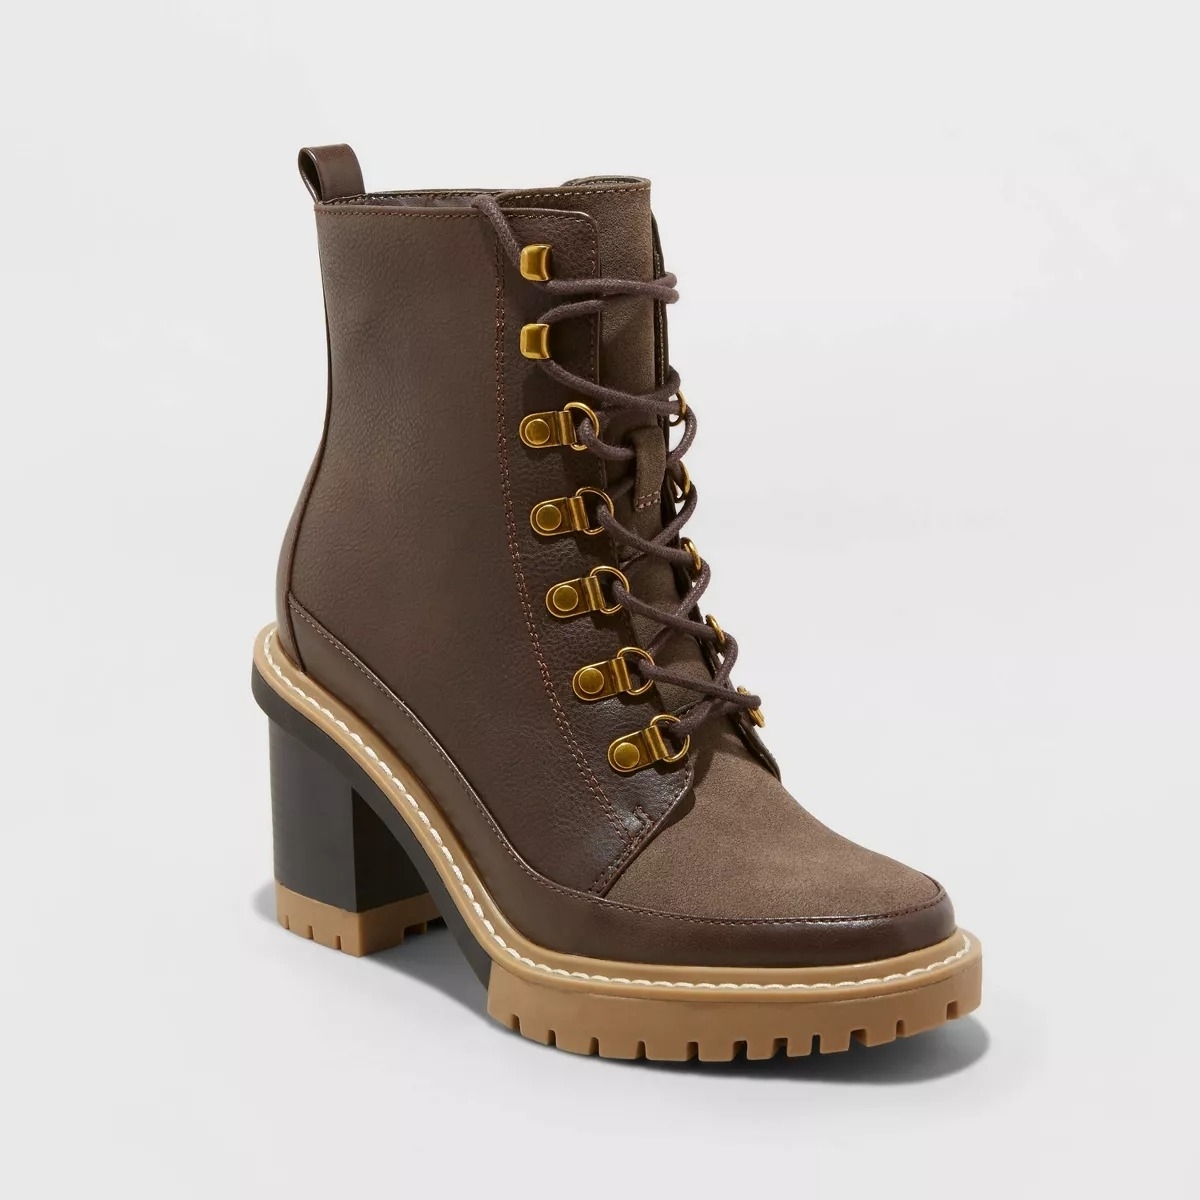 Trendy Target Boots: 20 Stylish Choices for All Season